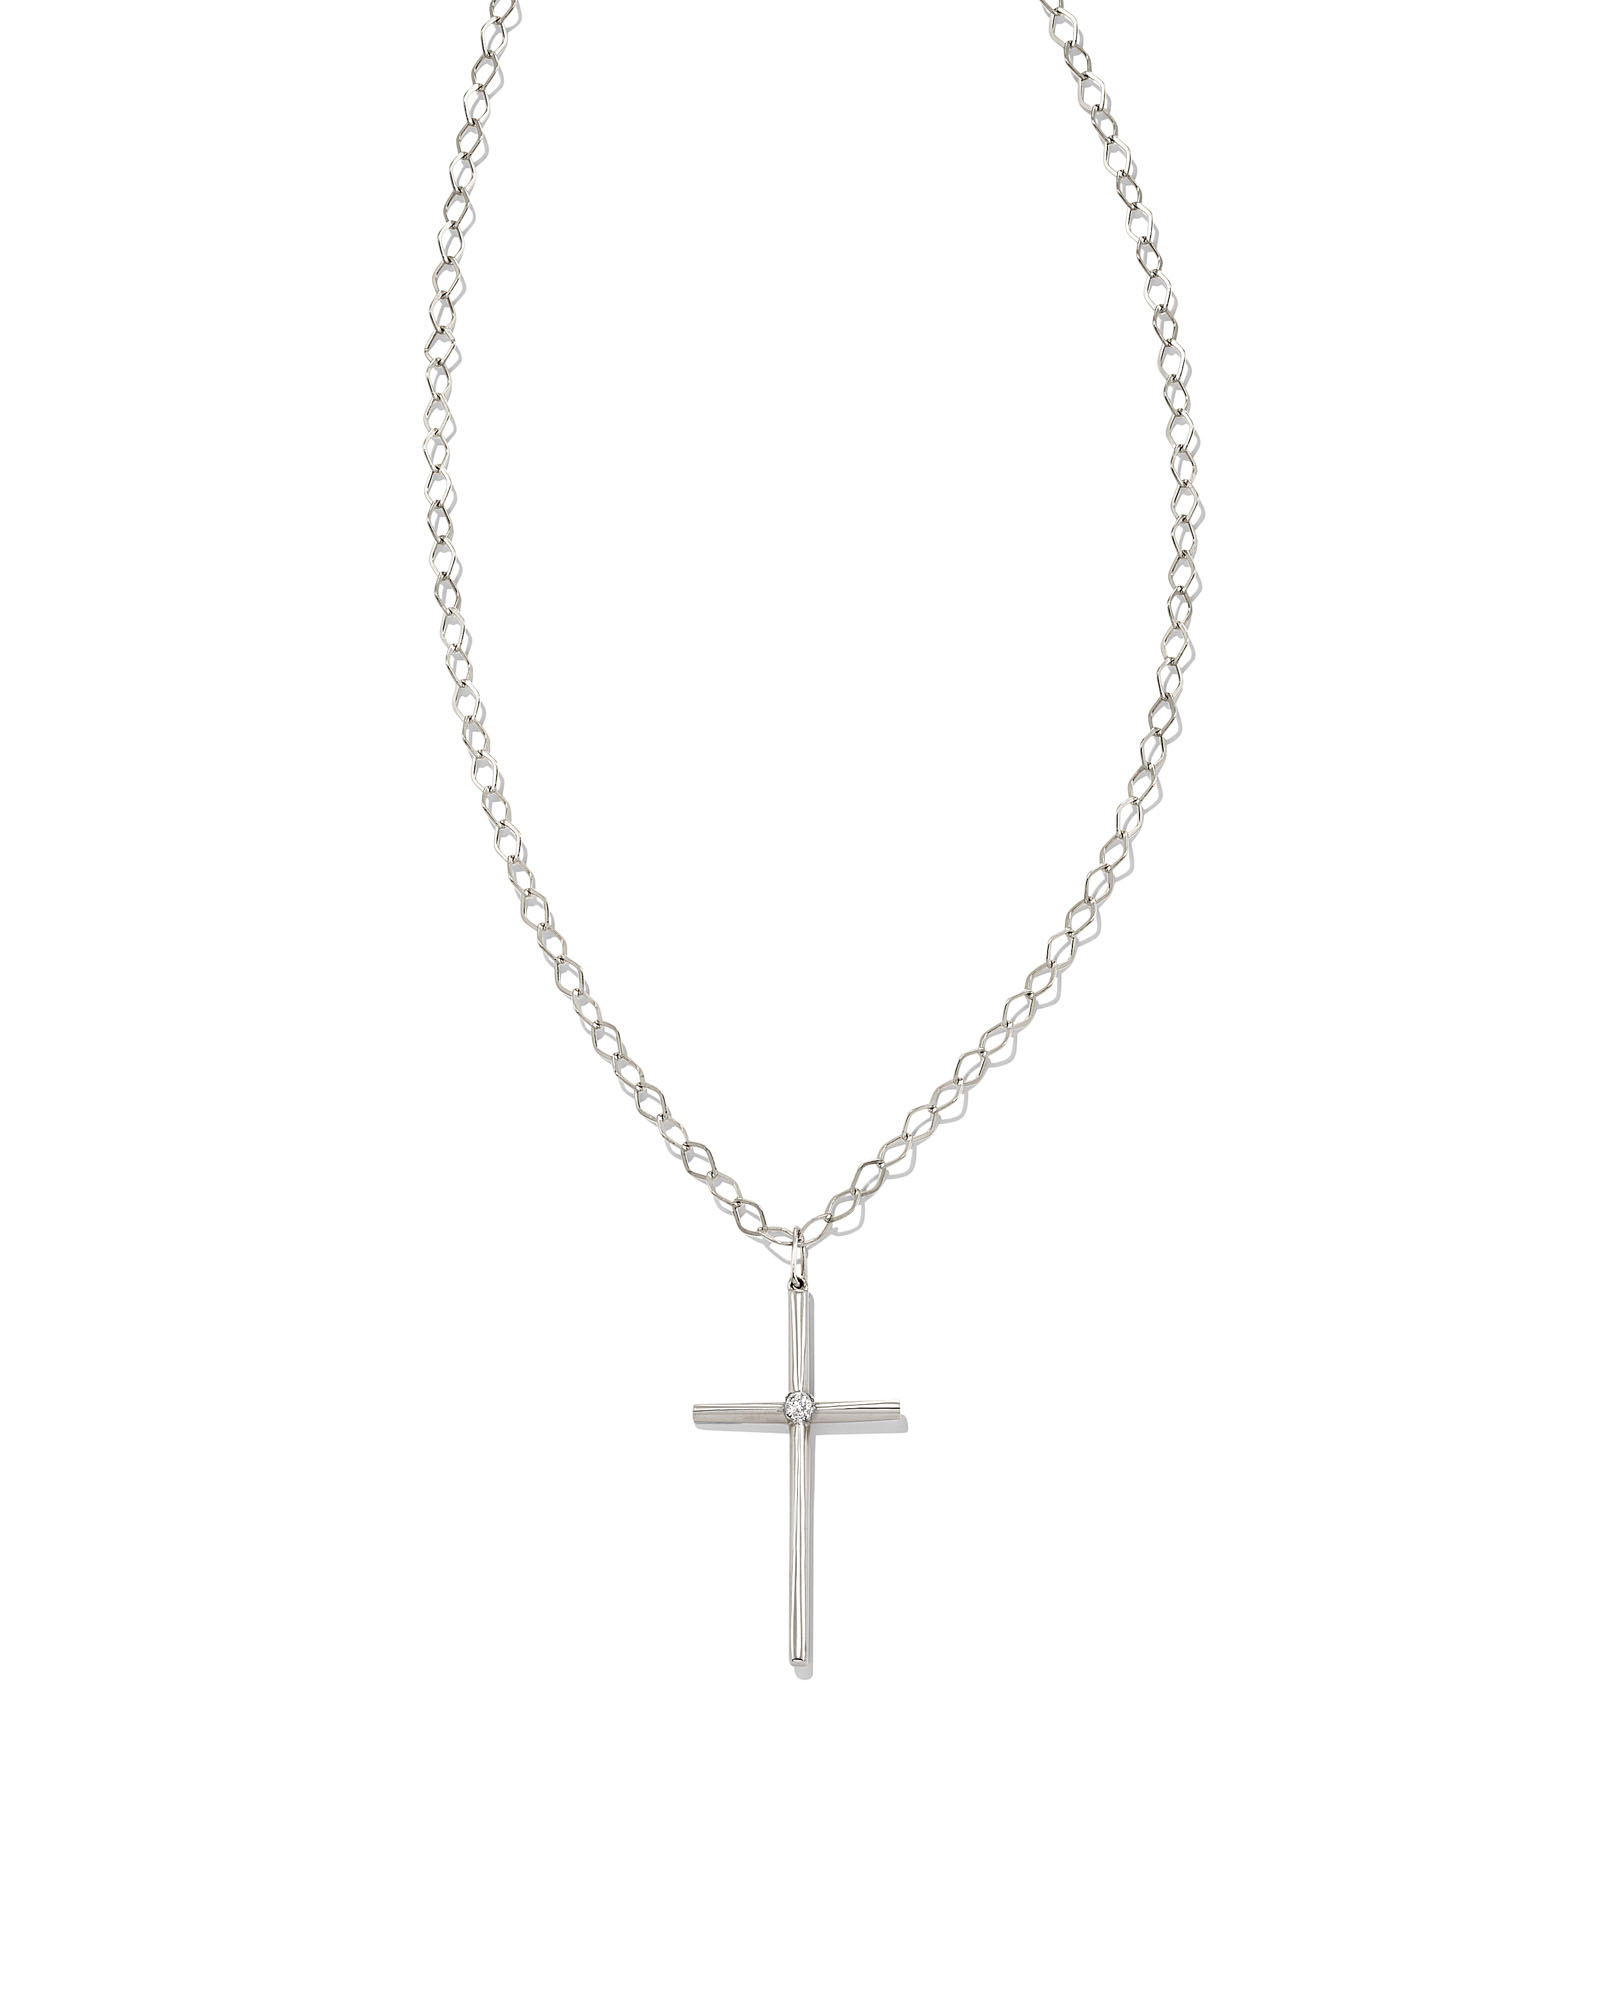 Heart and Cross Charms Giving Necklace, 35